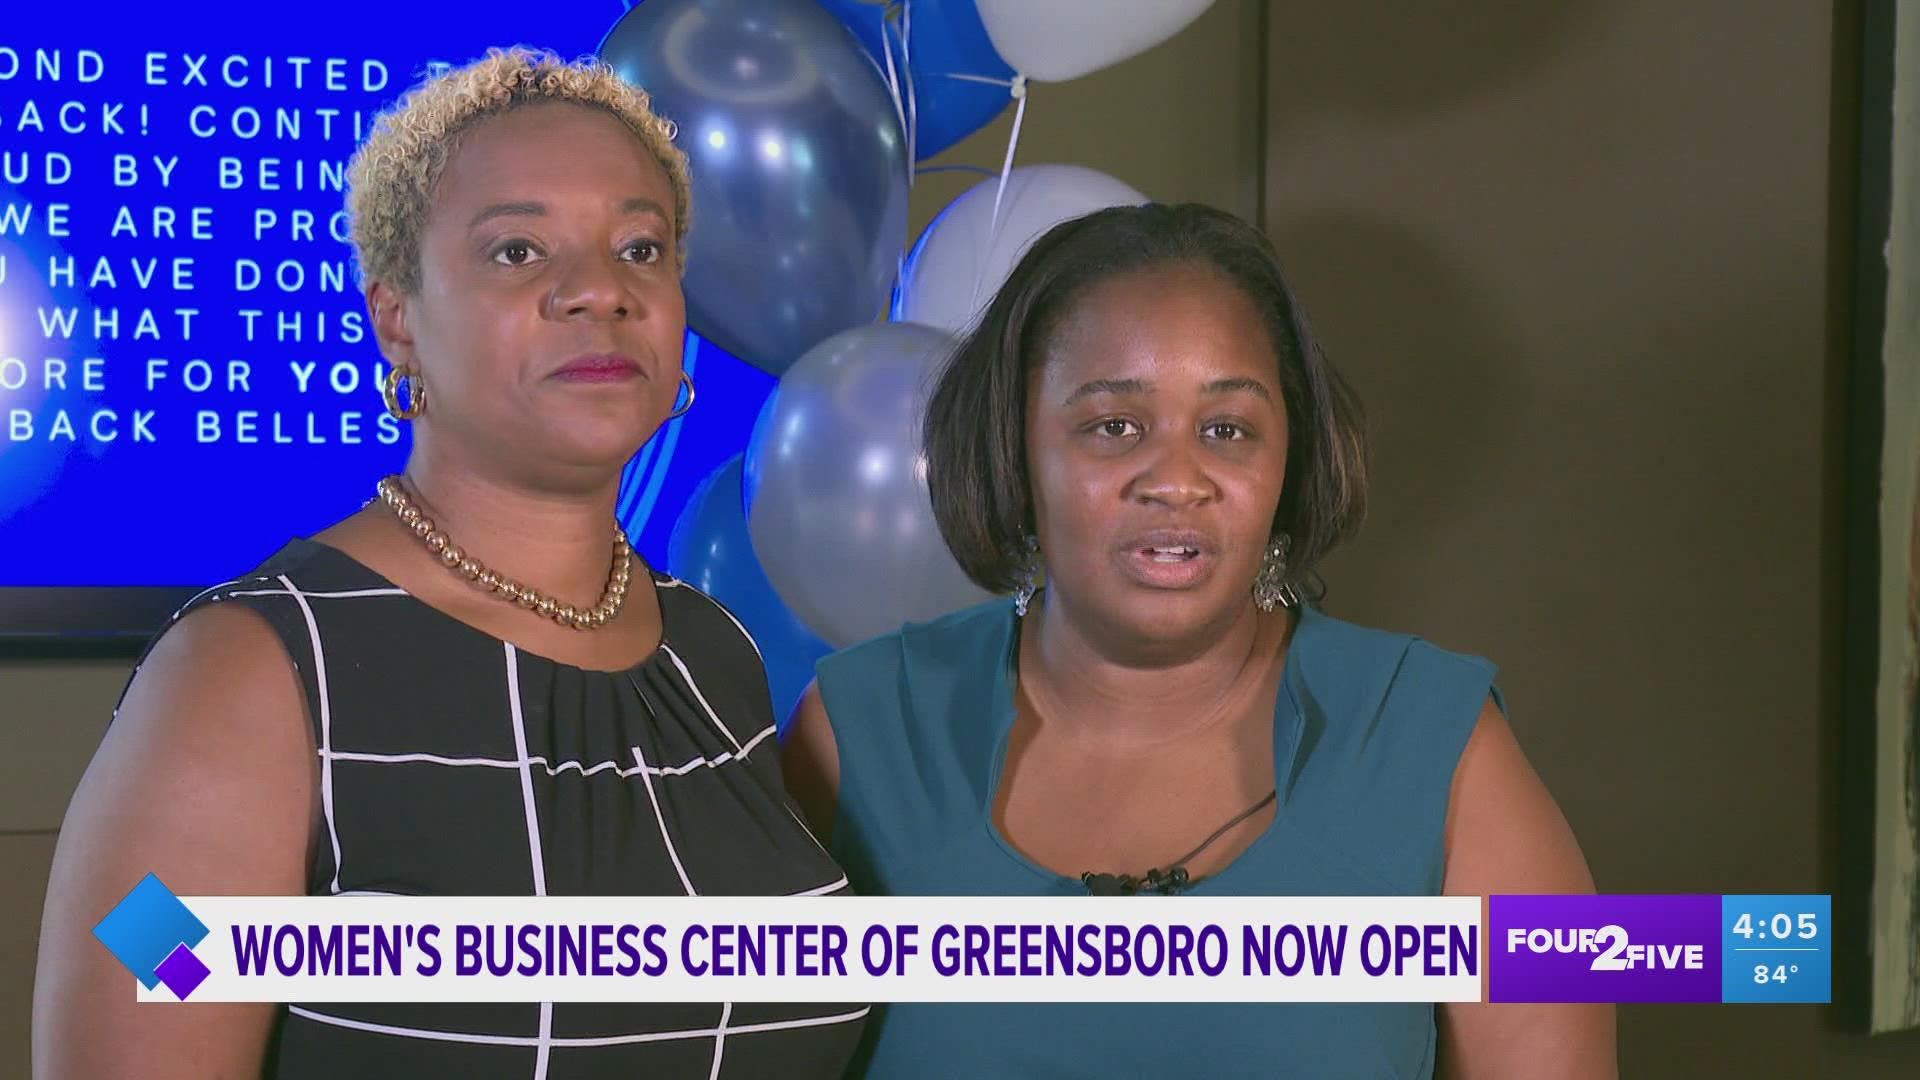 The Women's Business Center of Greensboro is the first of its kind in the United States.